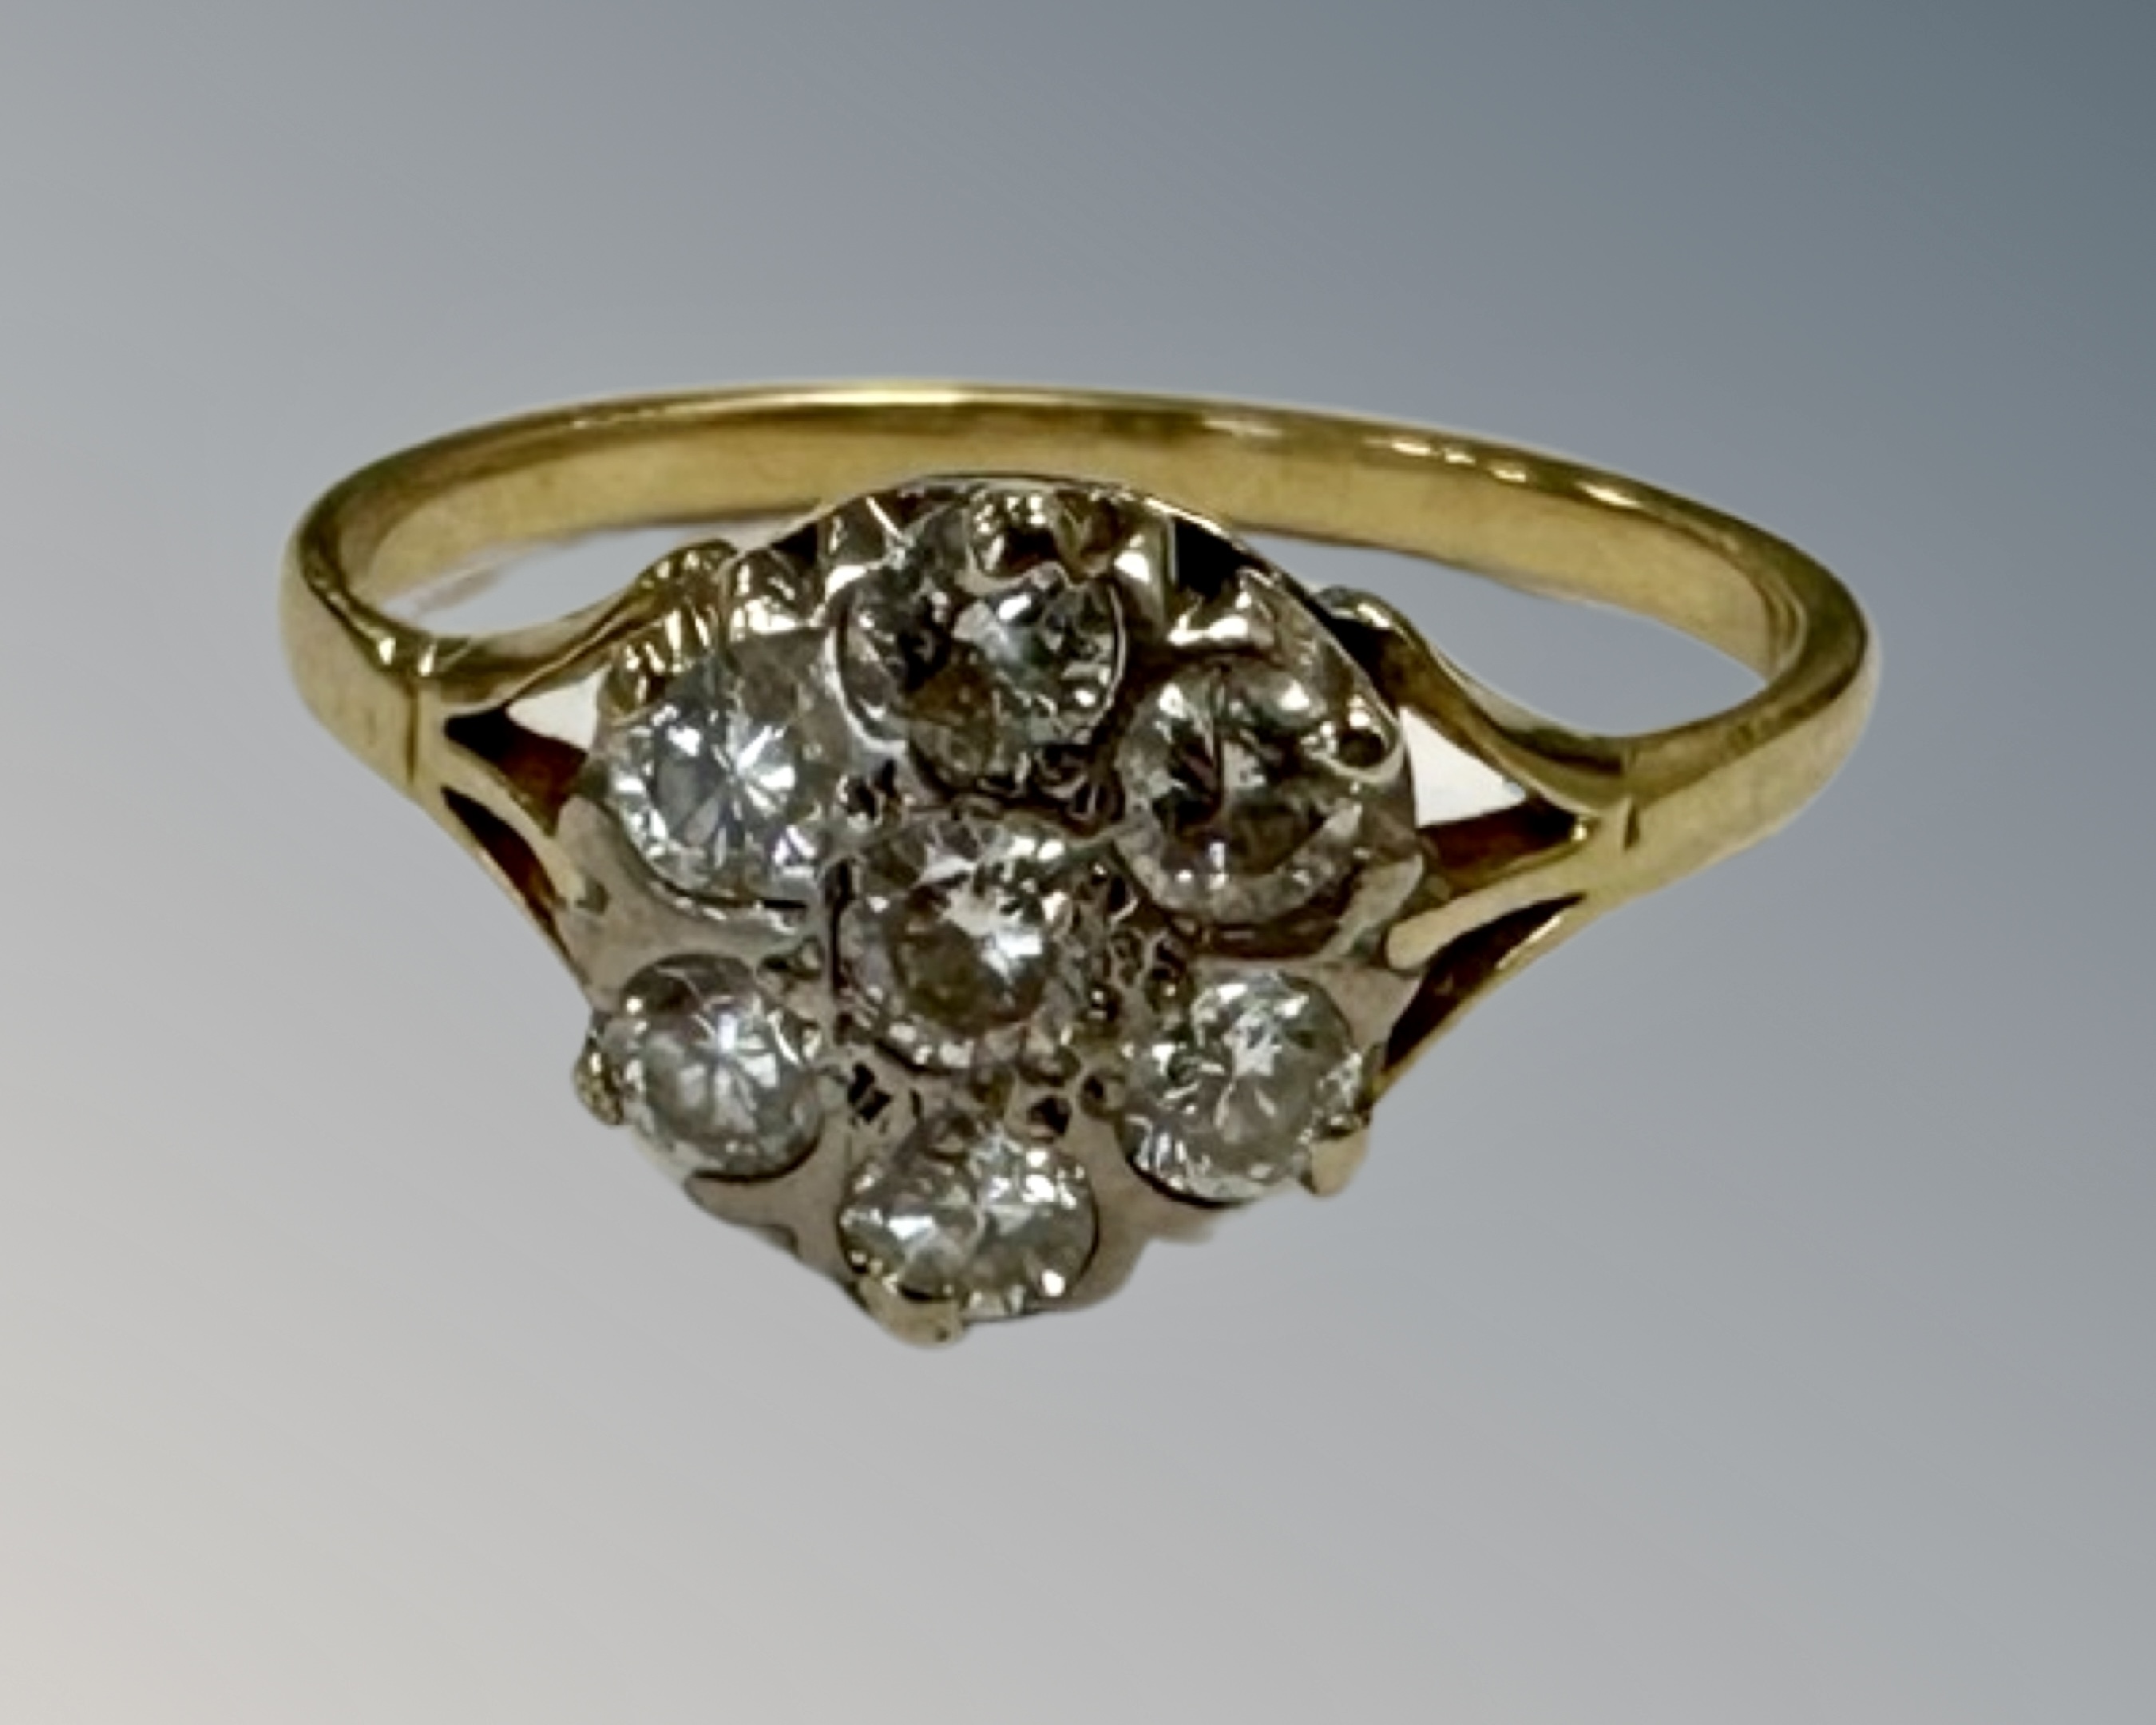 A yellow gold diamond cluster ring, shank unmarked, the total diamond weight estimated at 0.